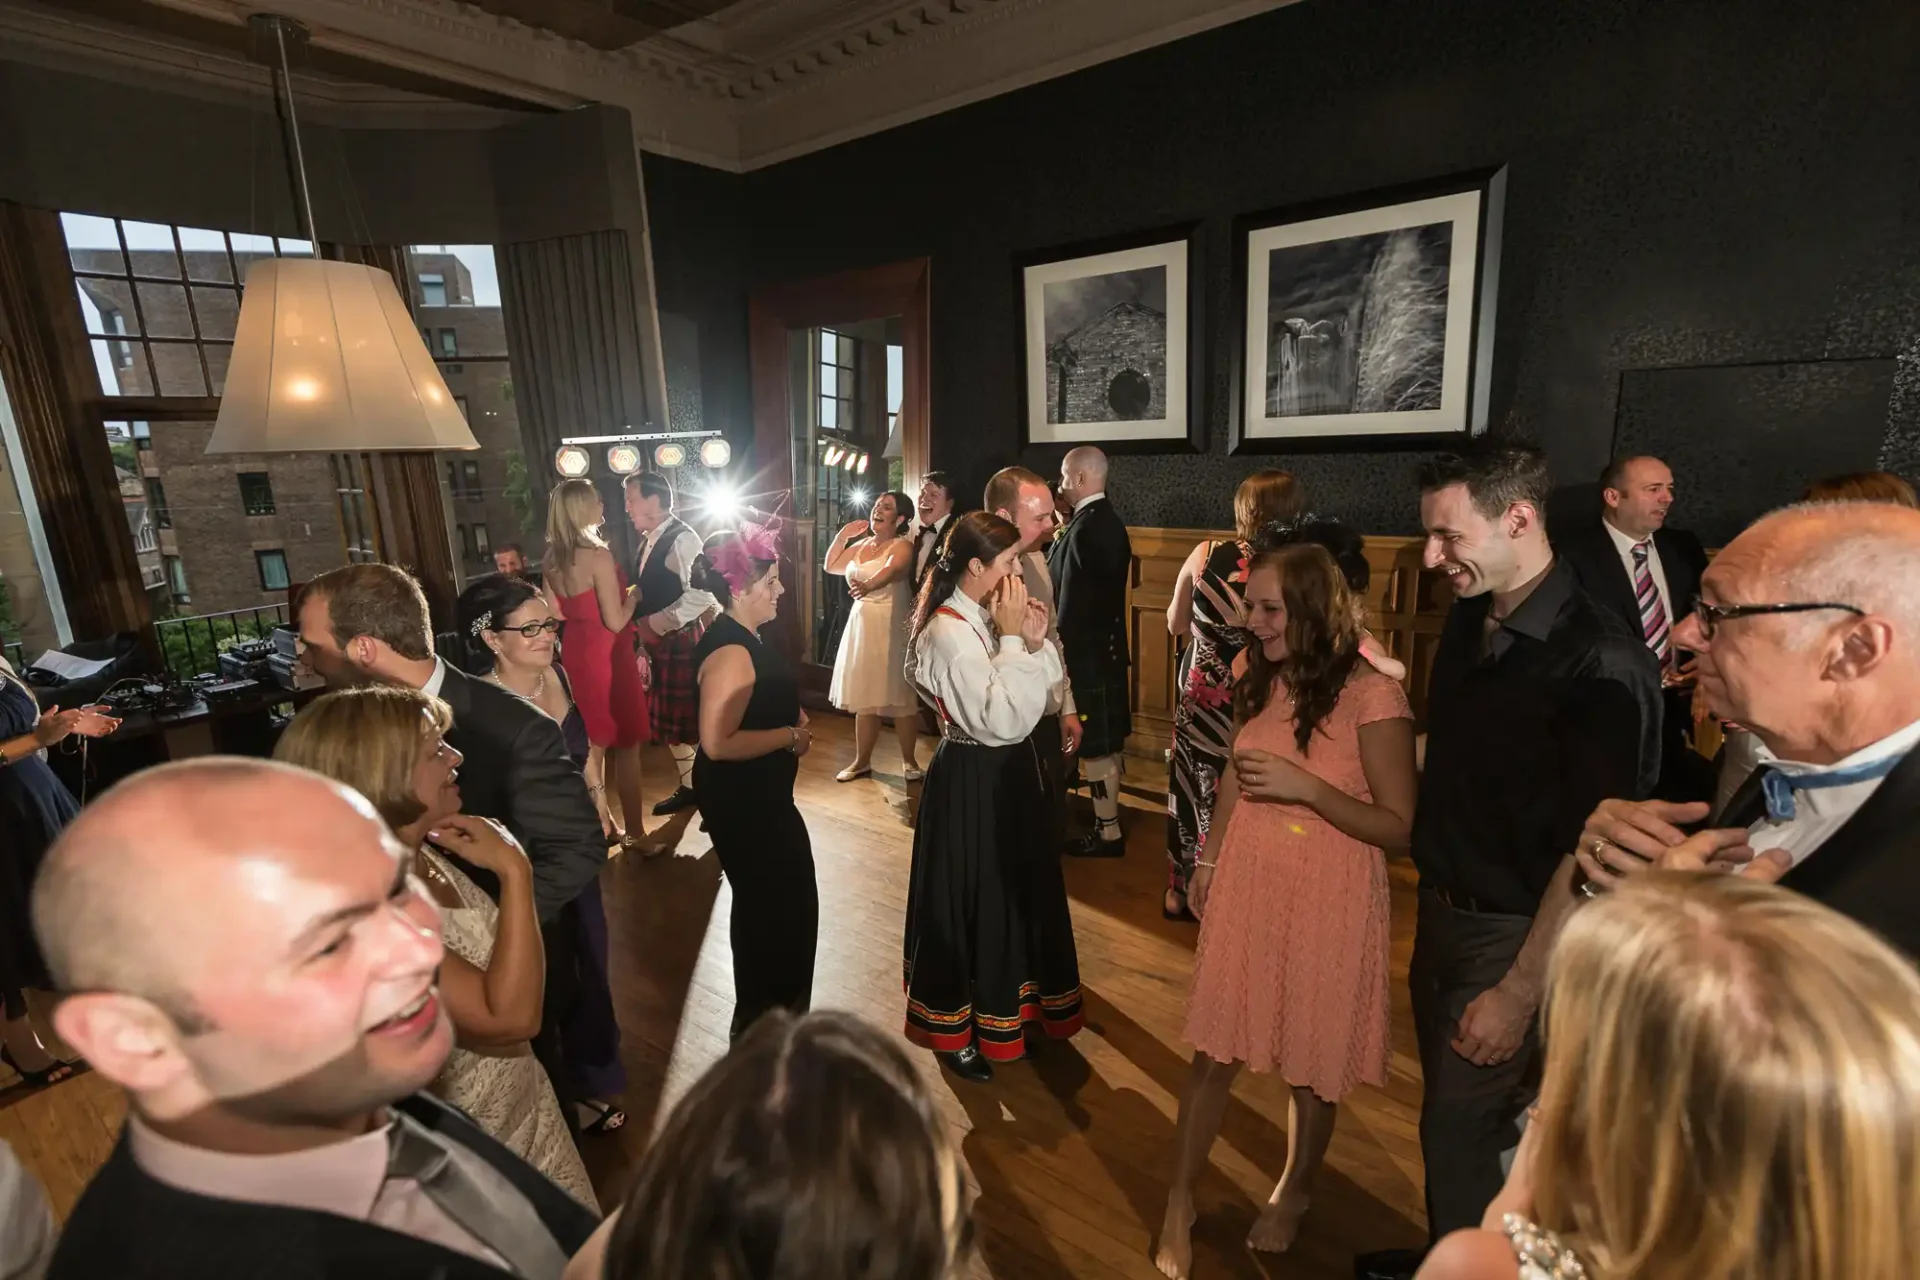 Guests in formal attire enjoy a lively indoor party with dancing and socializing in a room decorated with framed photographs.